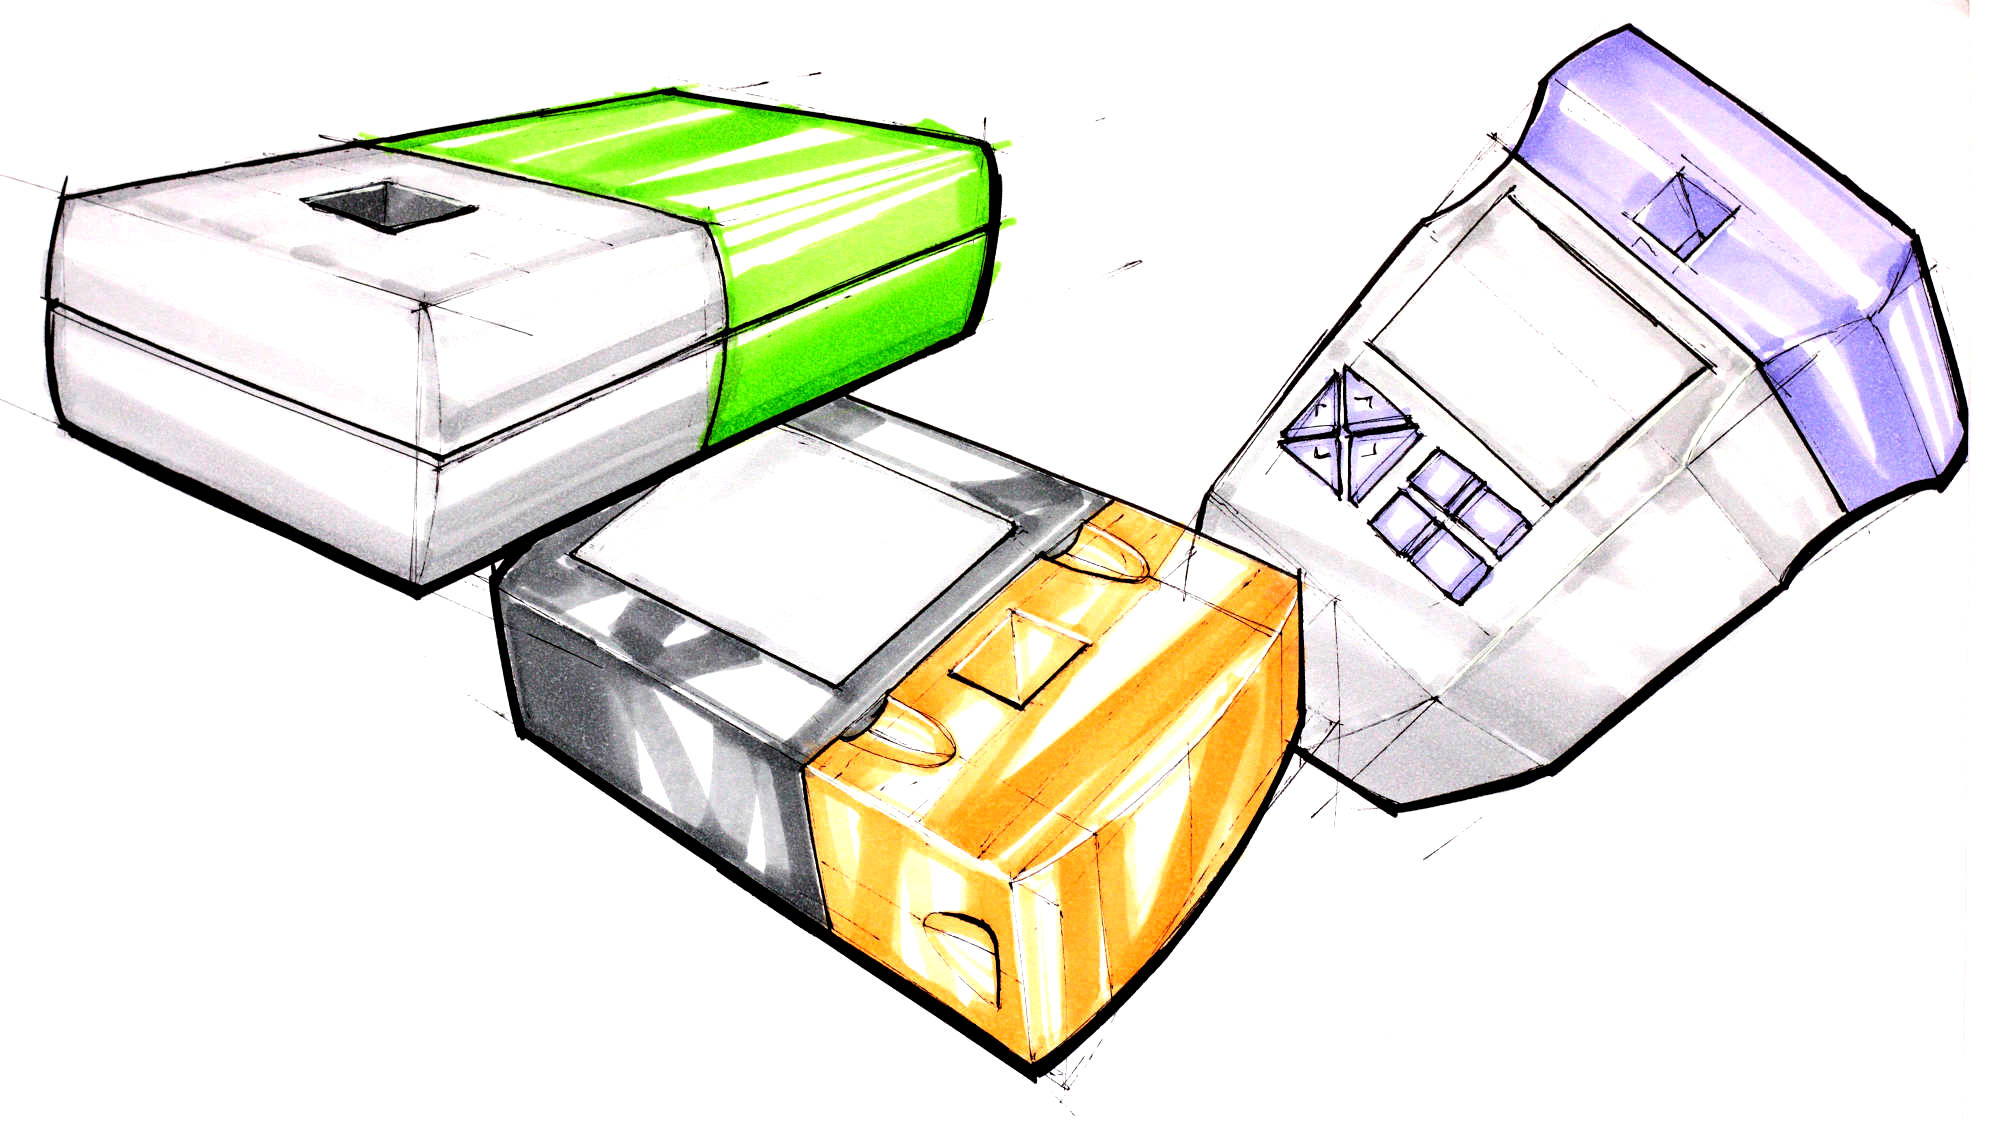 3 quickly marker rendered sketches of different styles for the spectrometer. 1 has no features except a hole for the sample, another has a screen added, a third is handheld-looking and has a screen and buttons